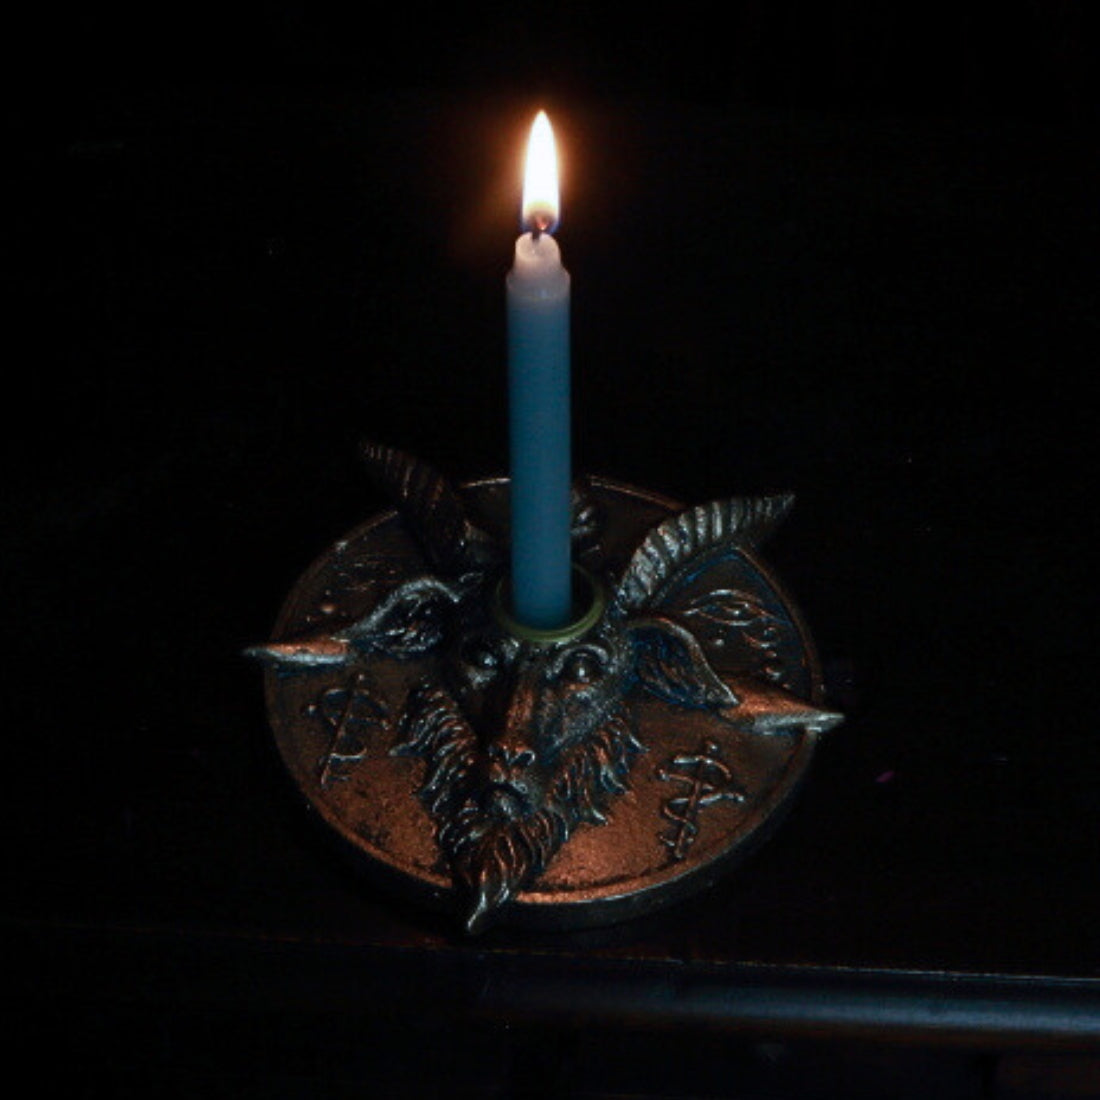 Baphomet Head Incense and Candle Holder